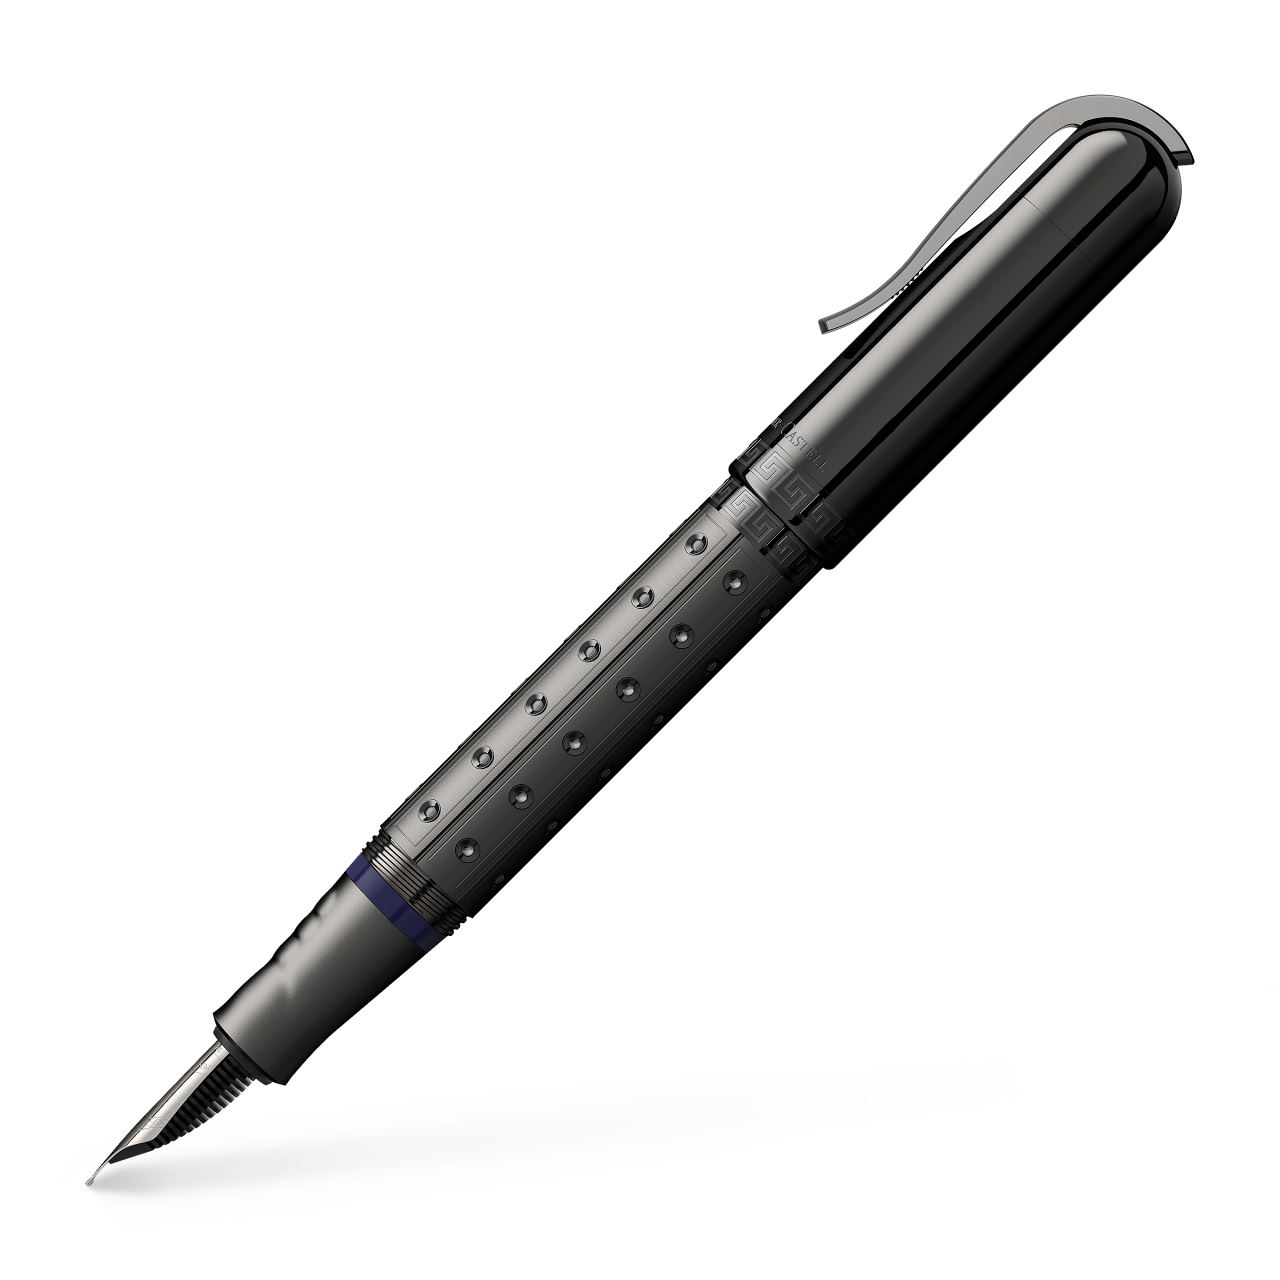 Graf-von-Faber-Castell - Fountain pen Pen of the Year 2020 Black Edition, Extra Broad